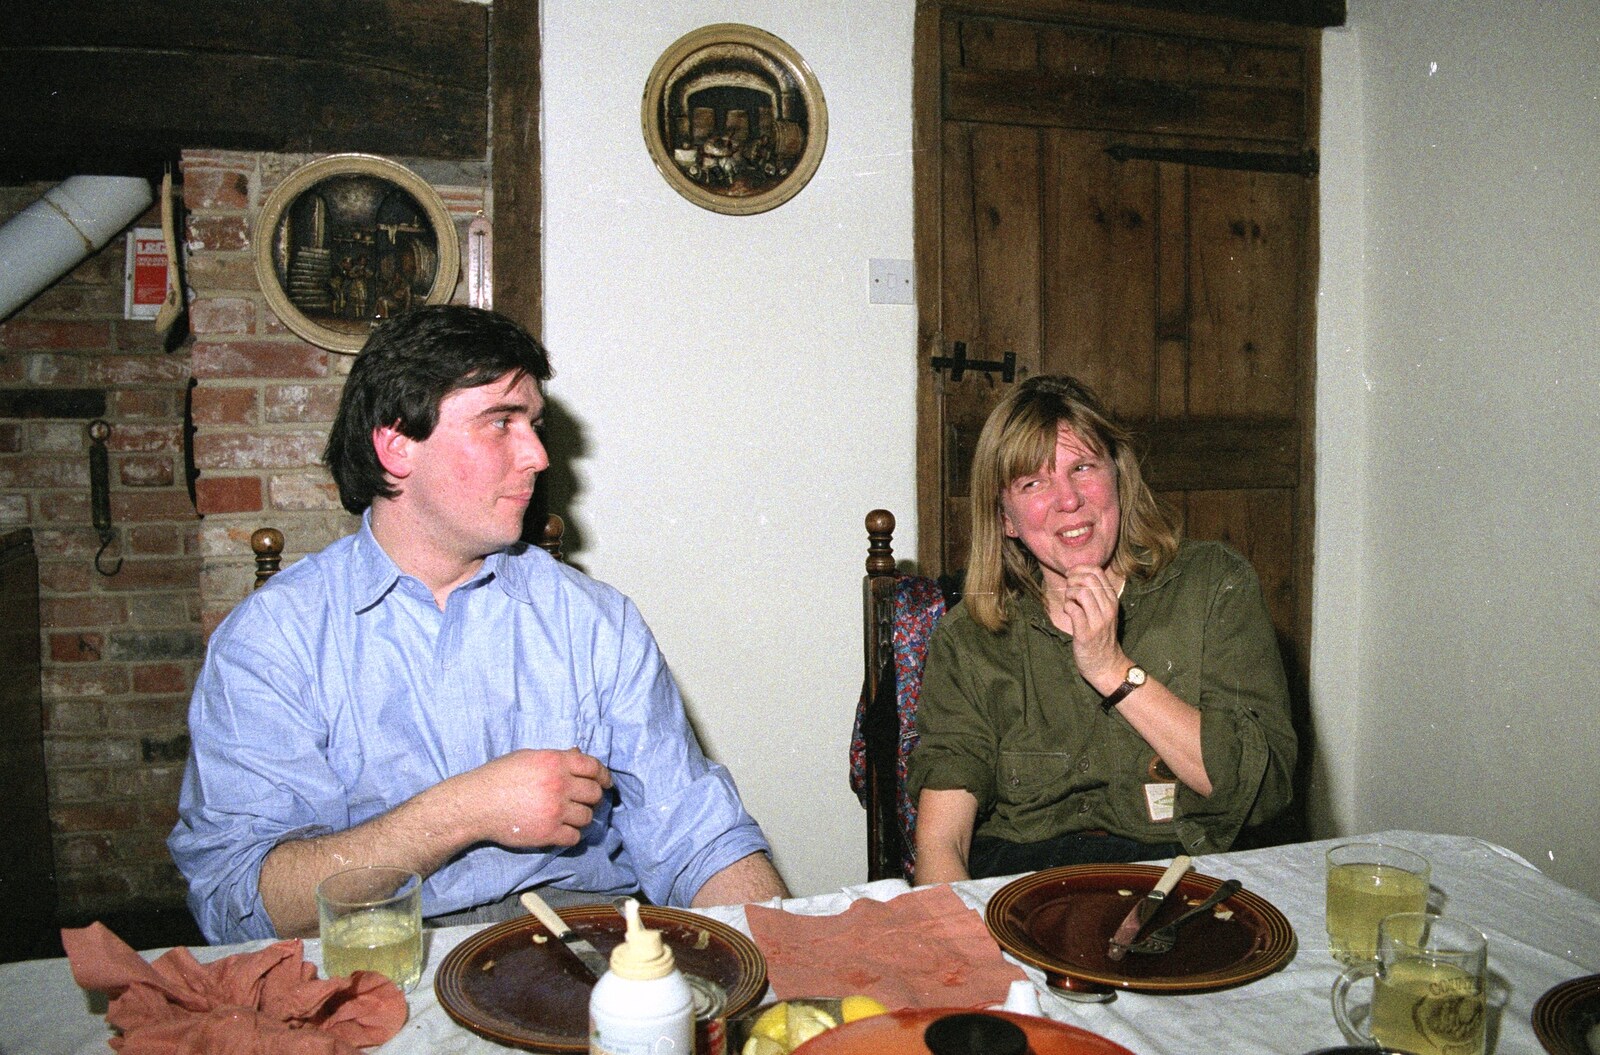 David and Janet from Pancake Day, Stuston, Suffolk - 18th February 1991